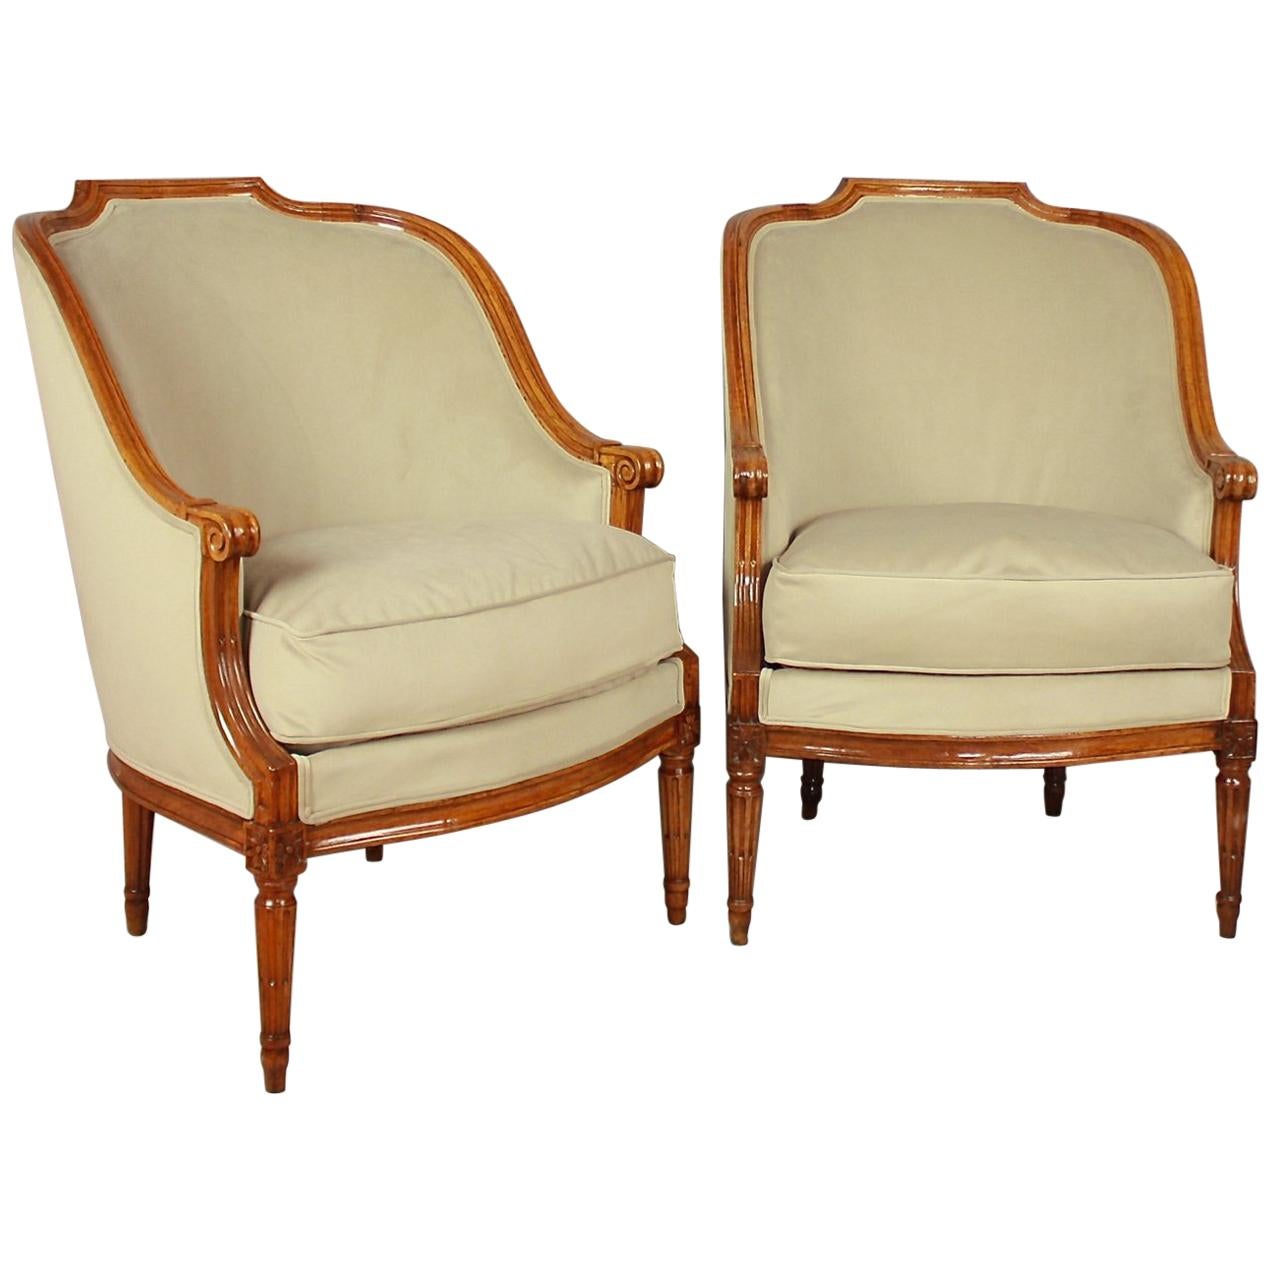 Pair of Louis XVI Walnut Bergeres or Armchairs, French, circa 1780